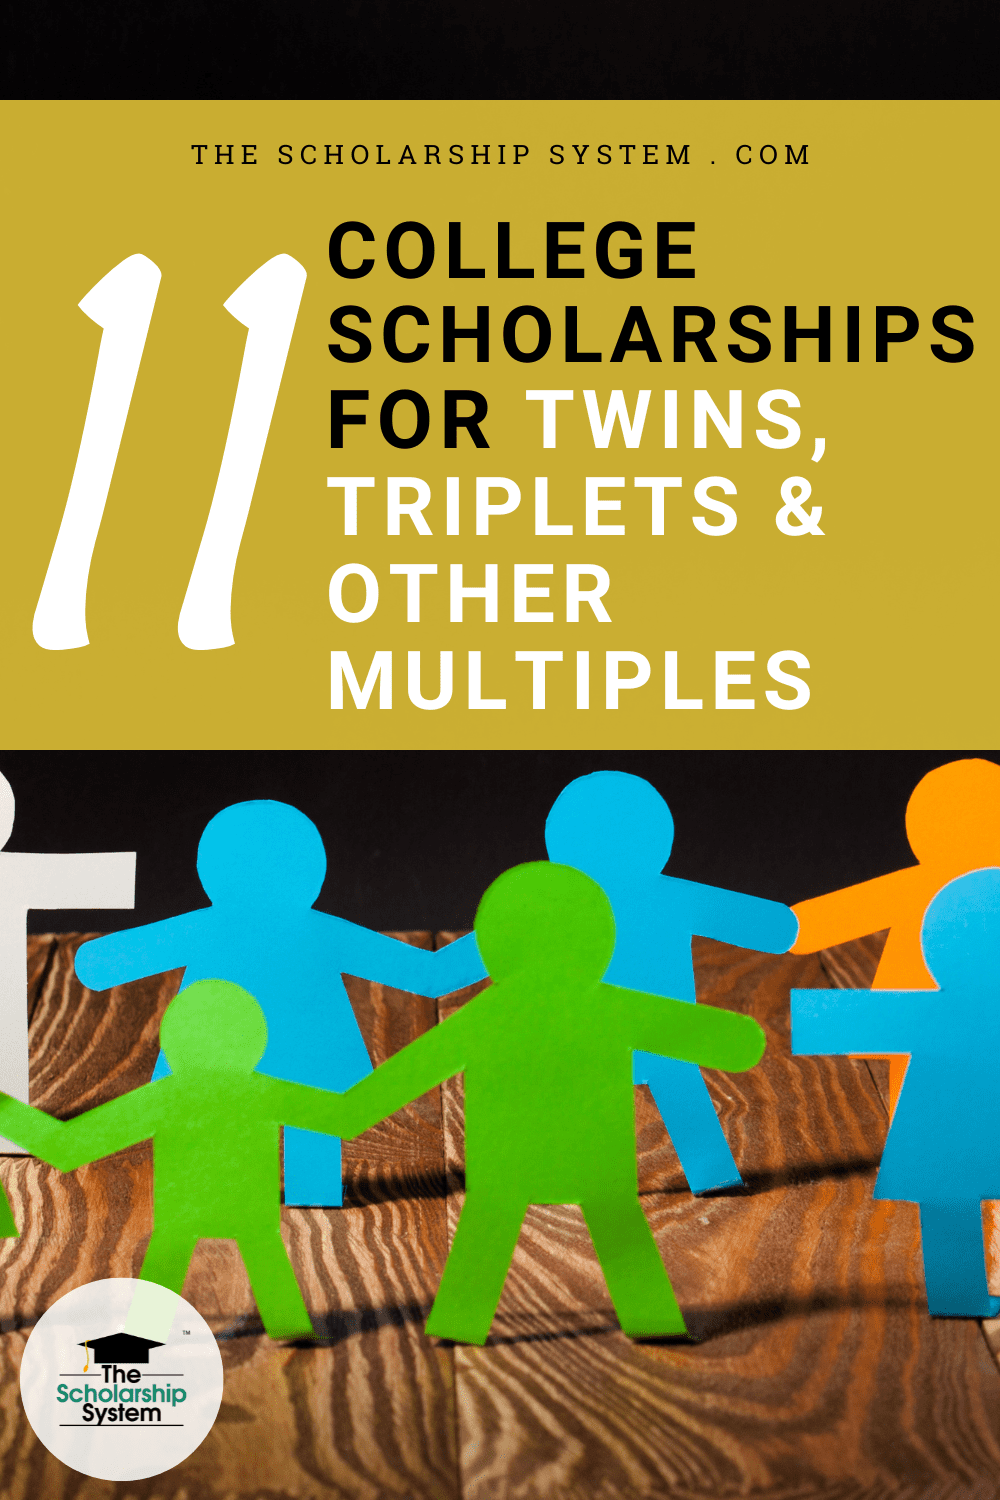 11 College Scholarships for Twins, Triplets, & Other Multiples The